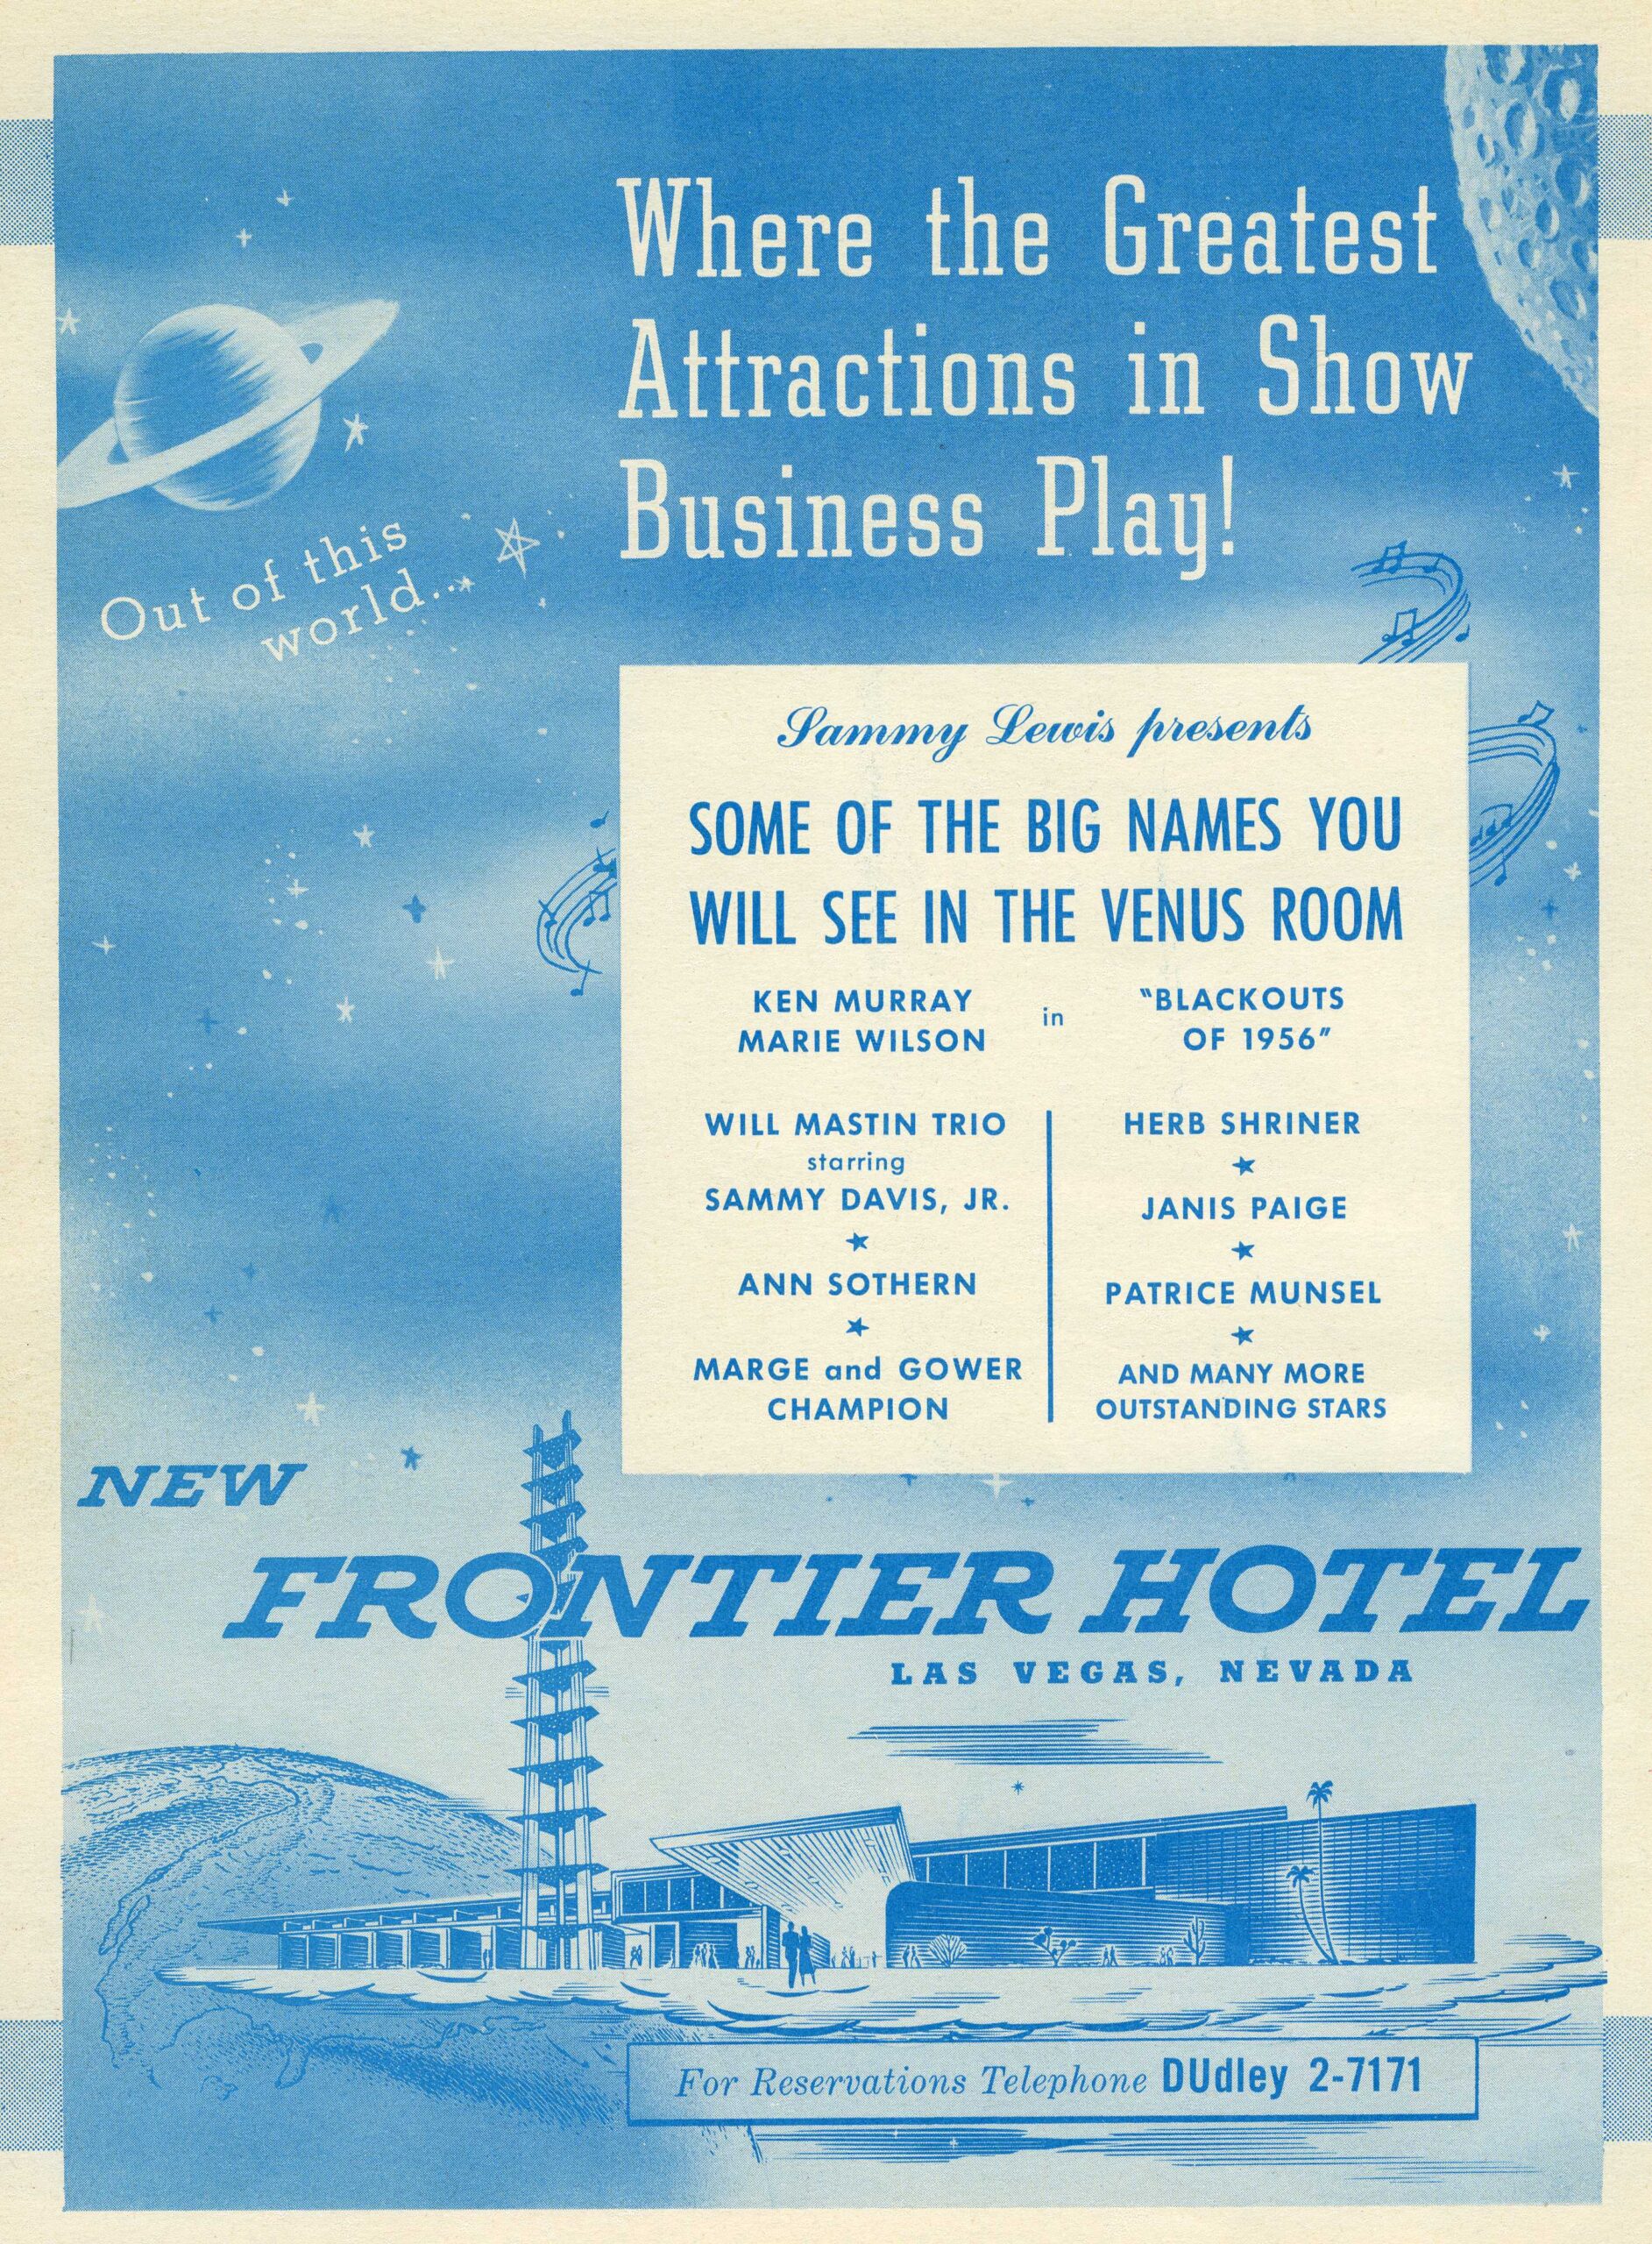 New Frontier Hotel ad in 1956 city directory listing the stars that will perform there